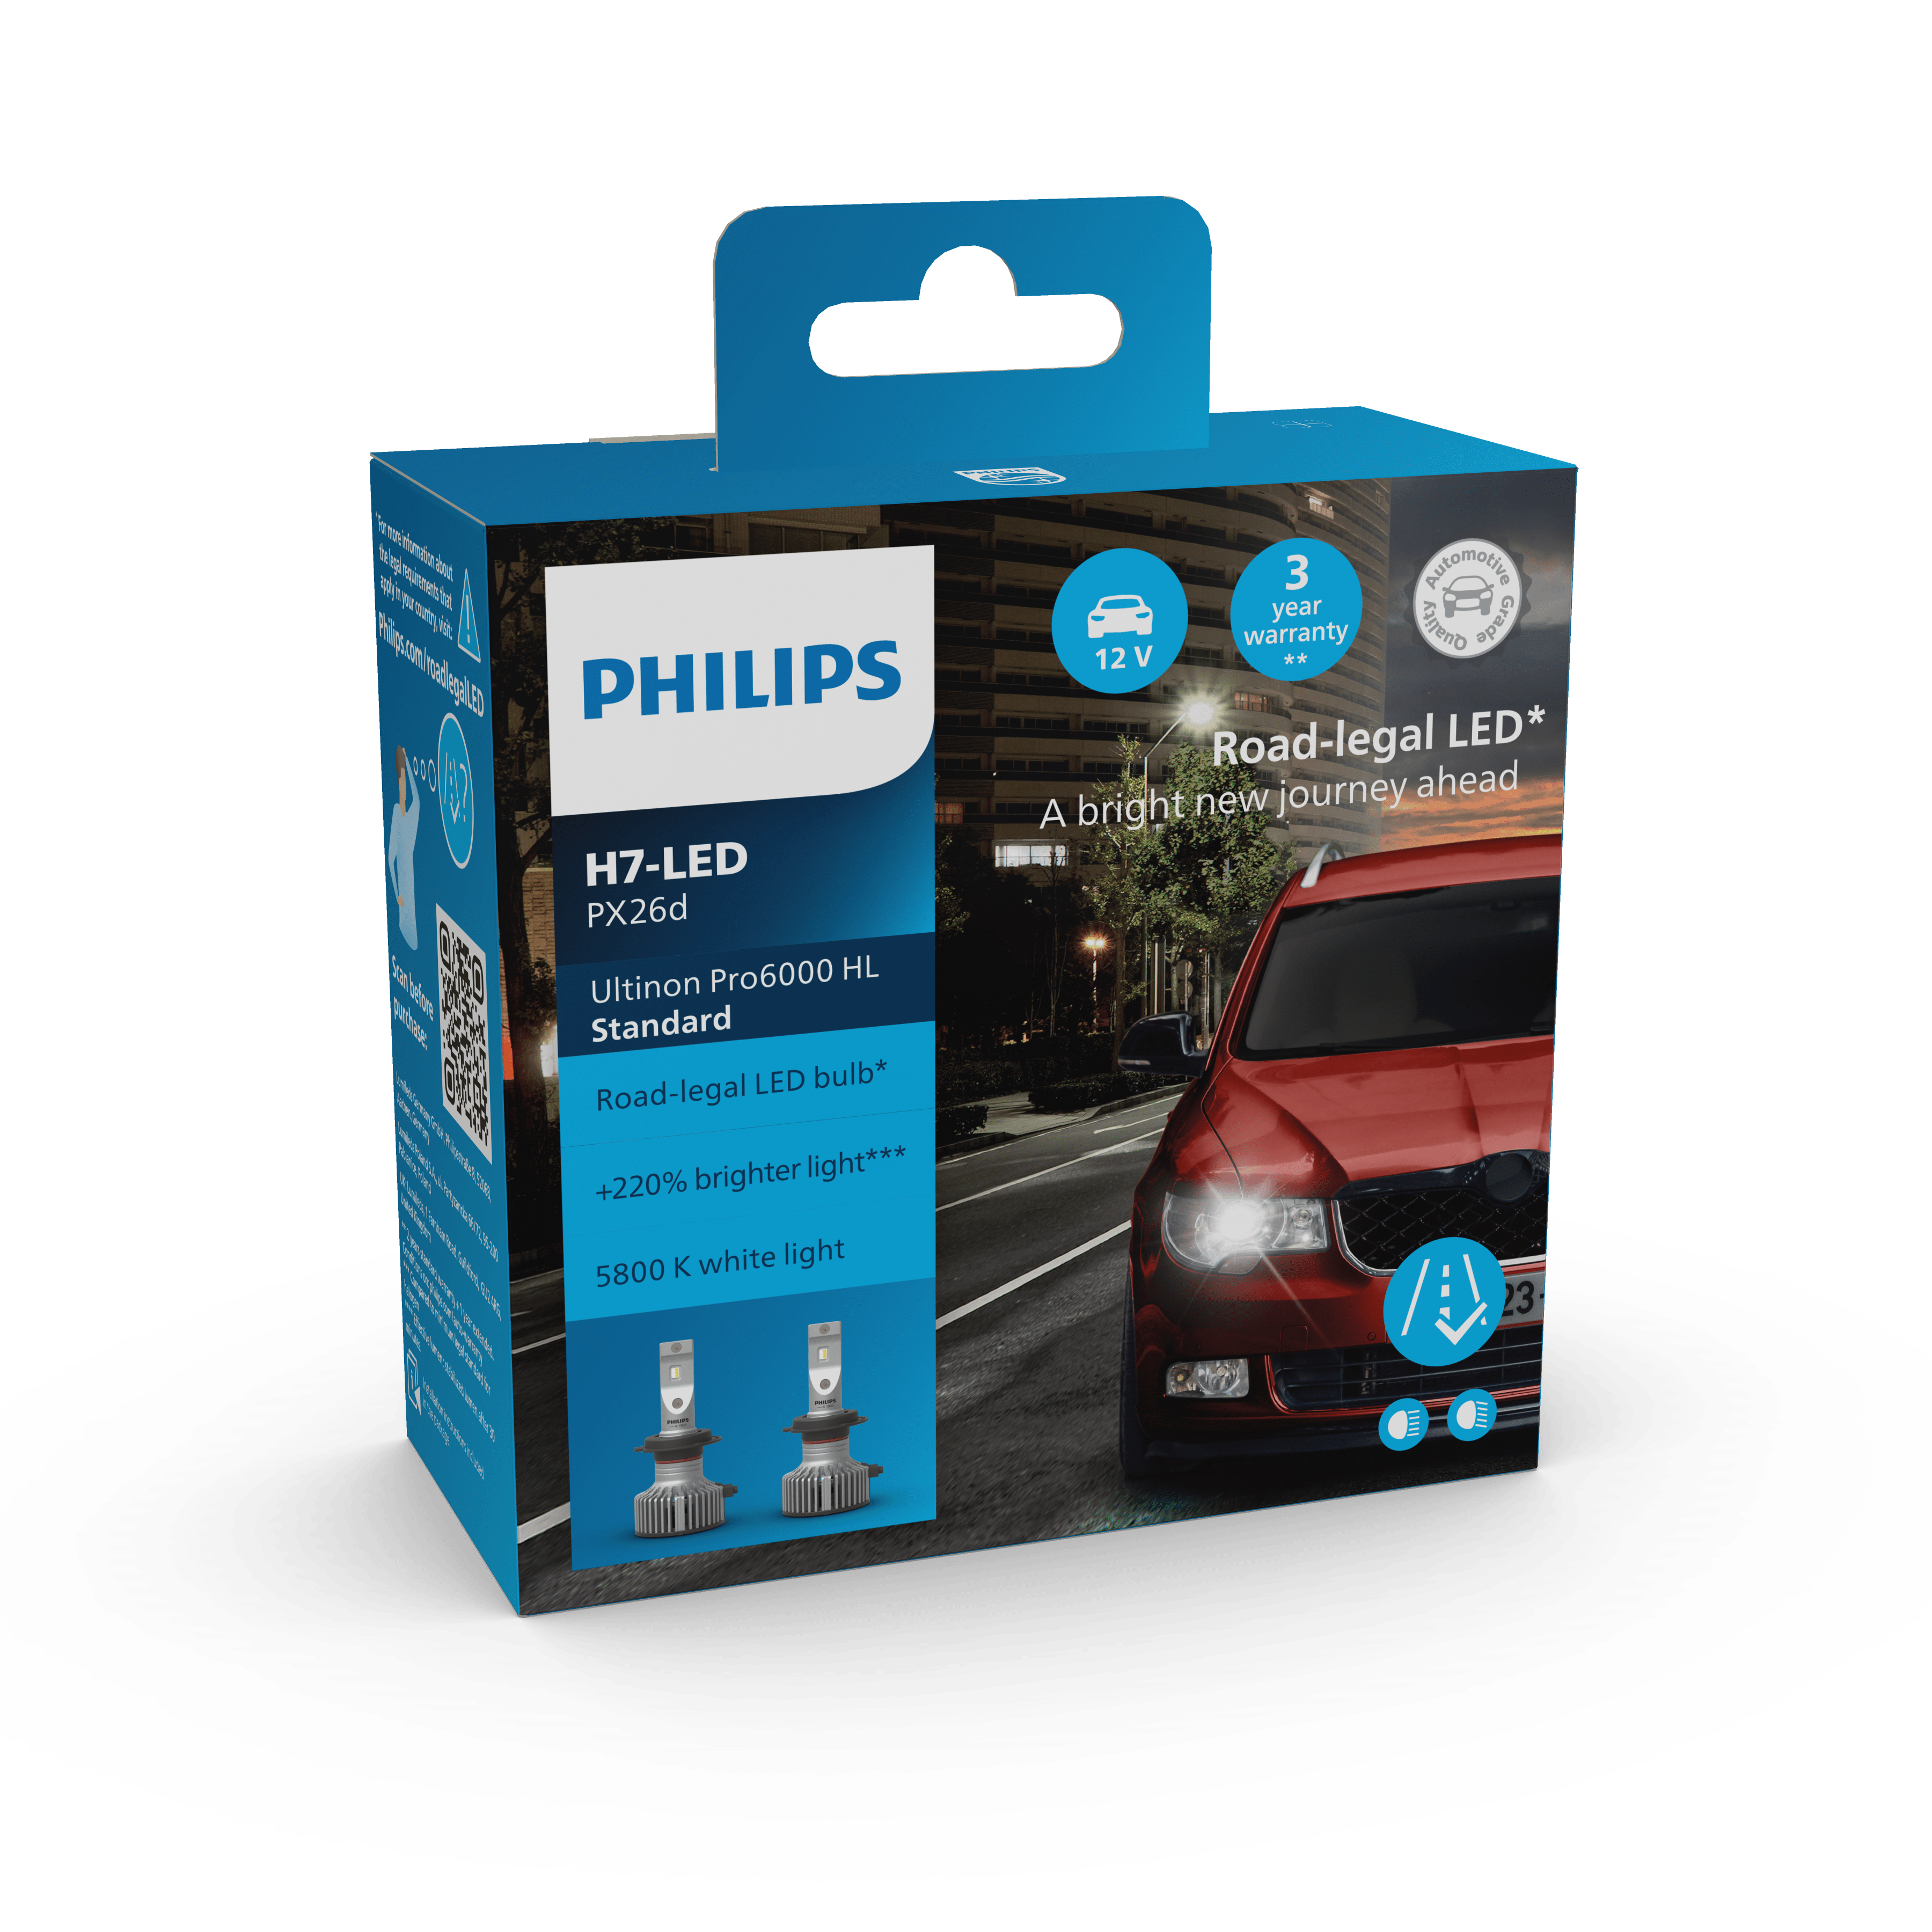 New Philips Ultinon Pro6000 Standard H7-LED Bulbs A Road-Legal, Bright New  Journey Ahead